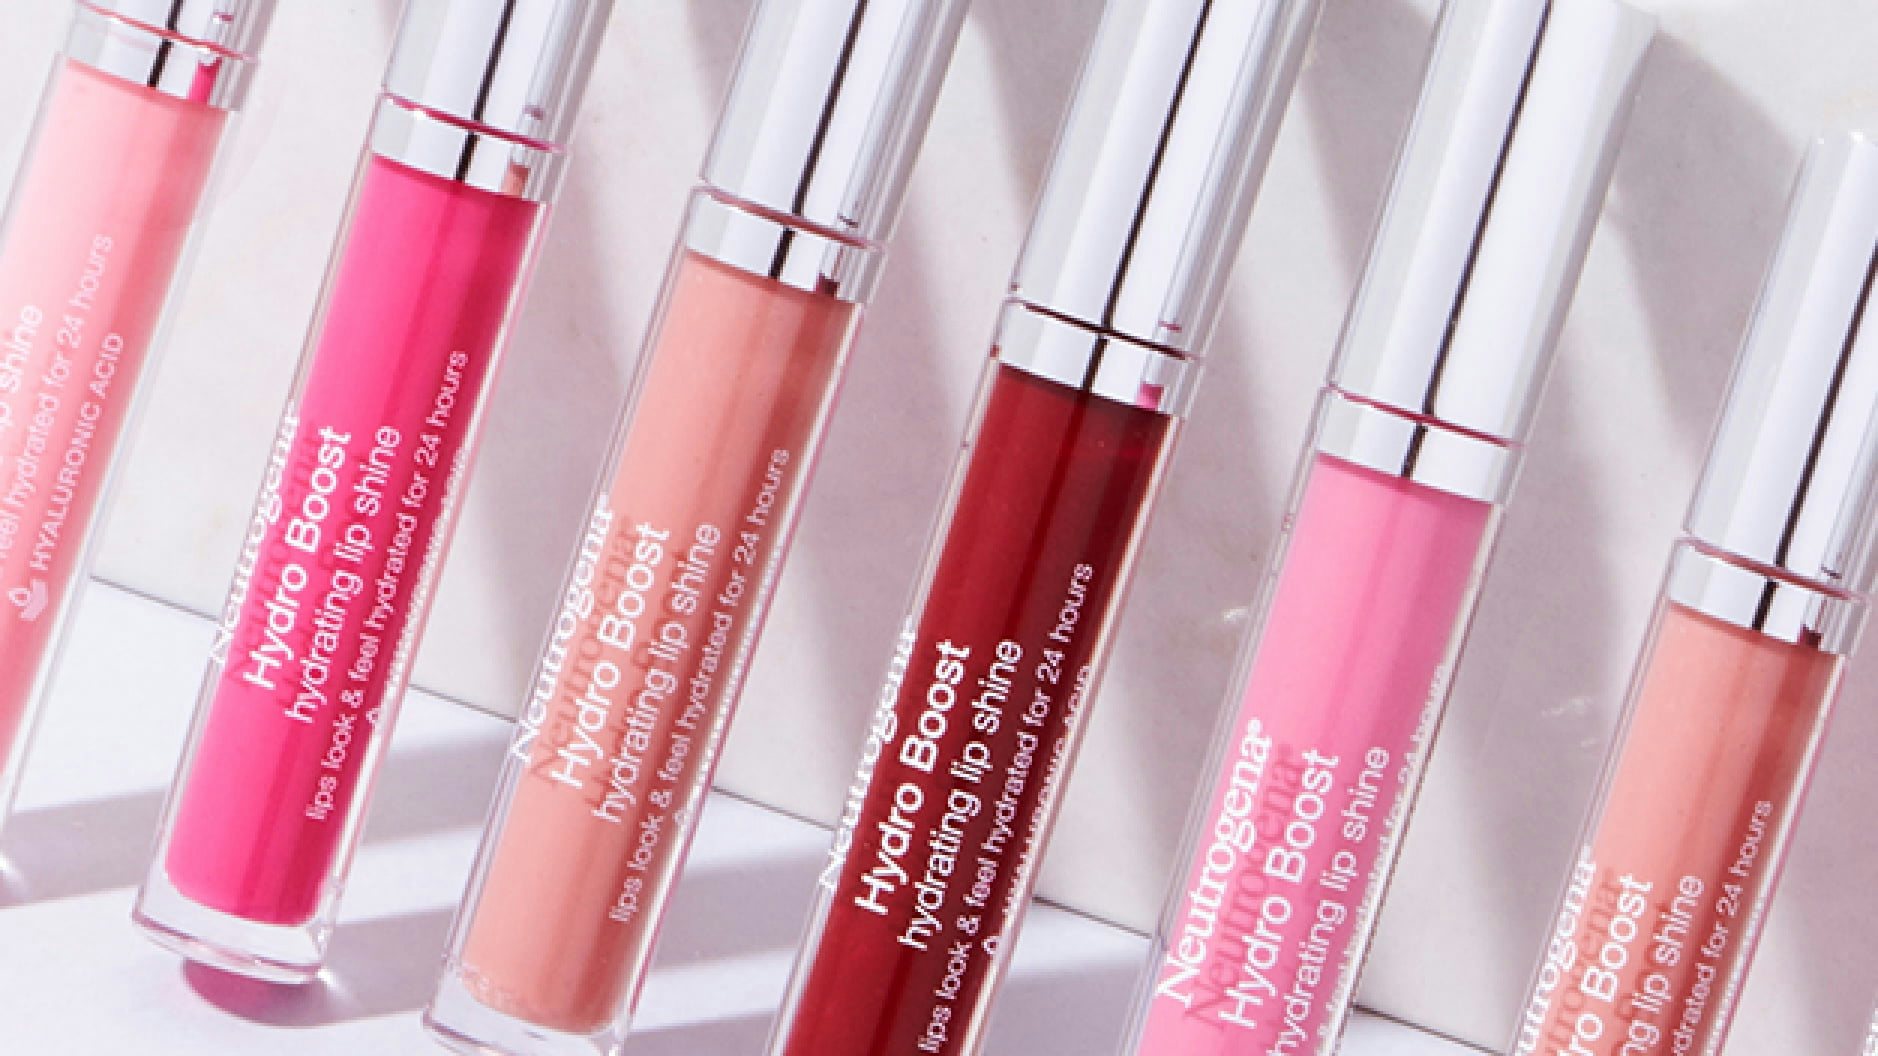 Hydro Boost Hydrating Lip Shine how to use 2